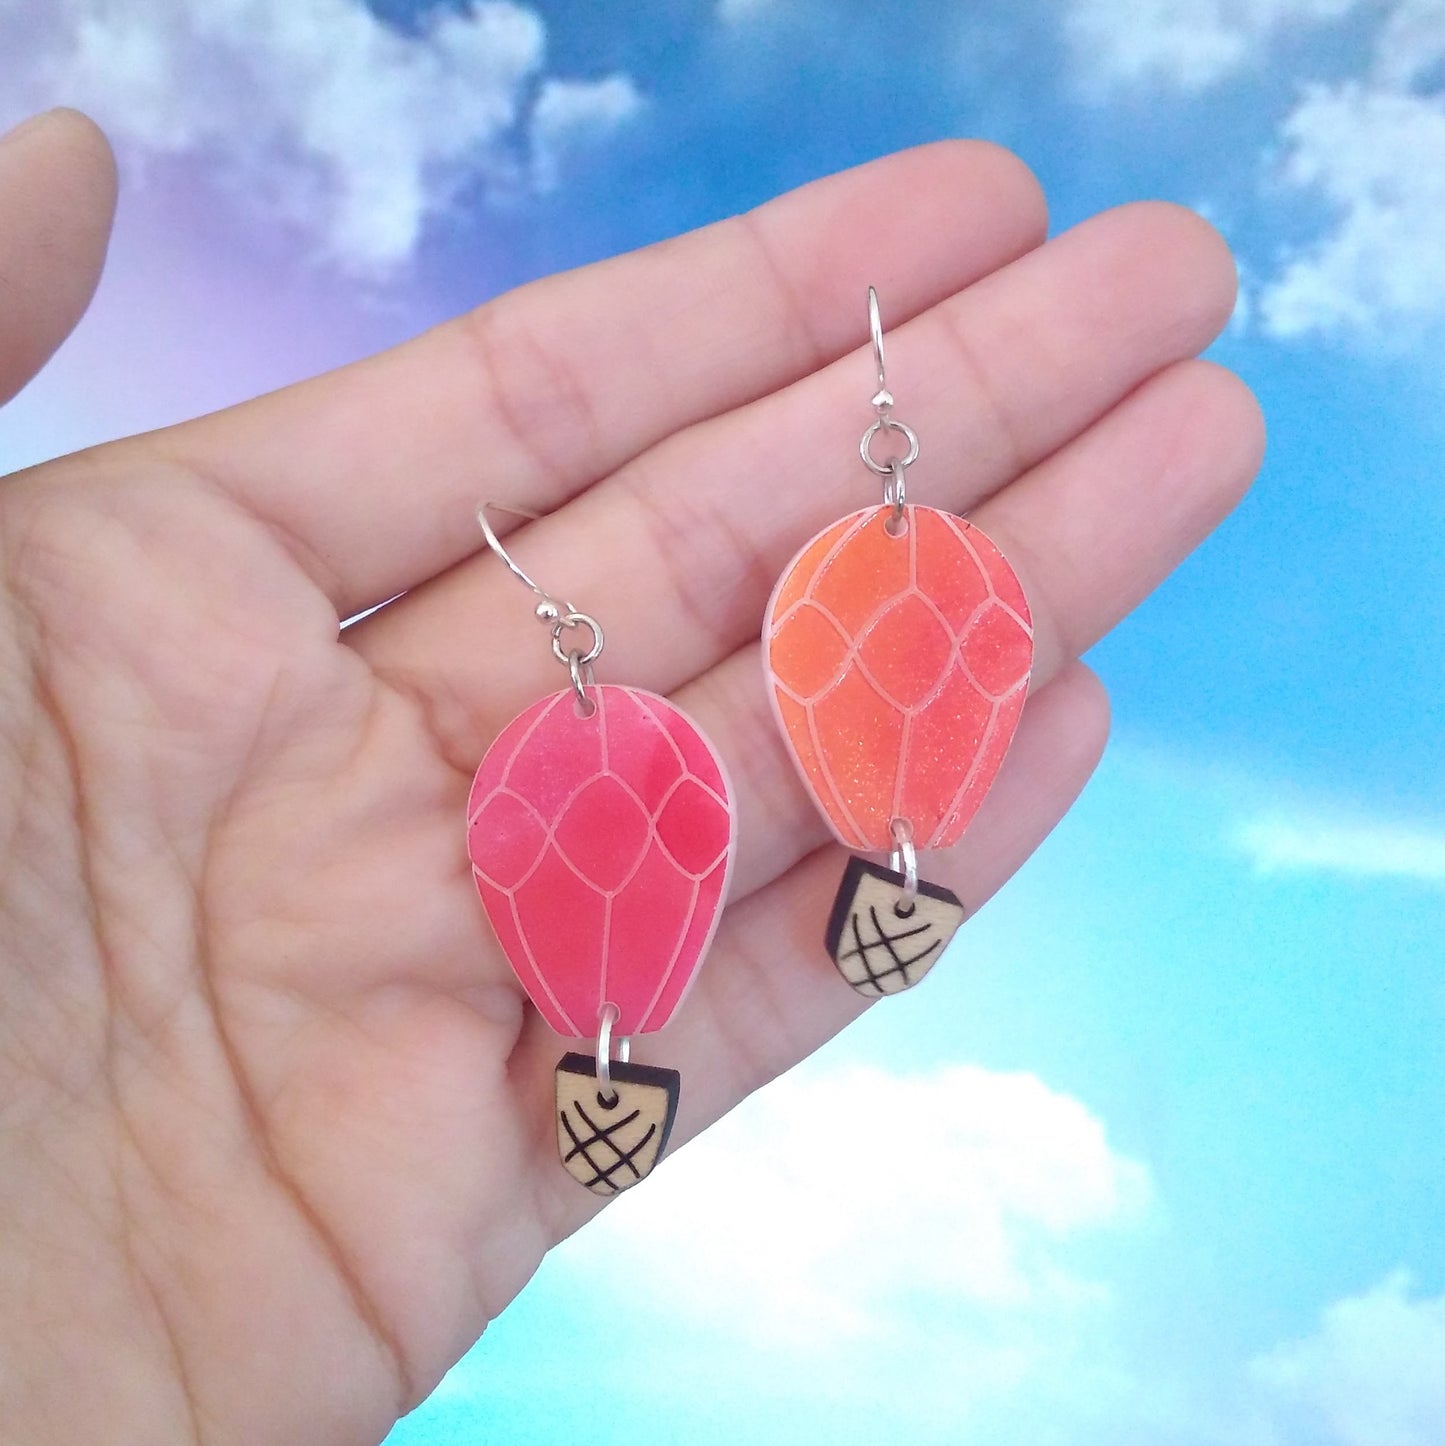 Hot Air Balloon with Wooden Basket Earrings